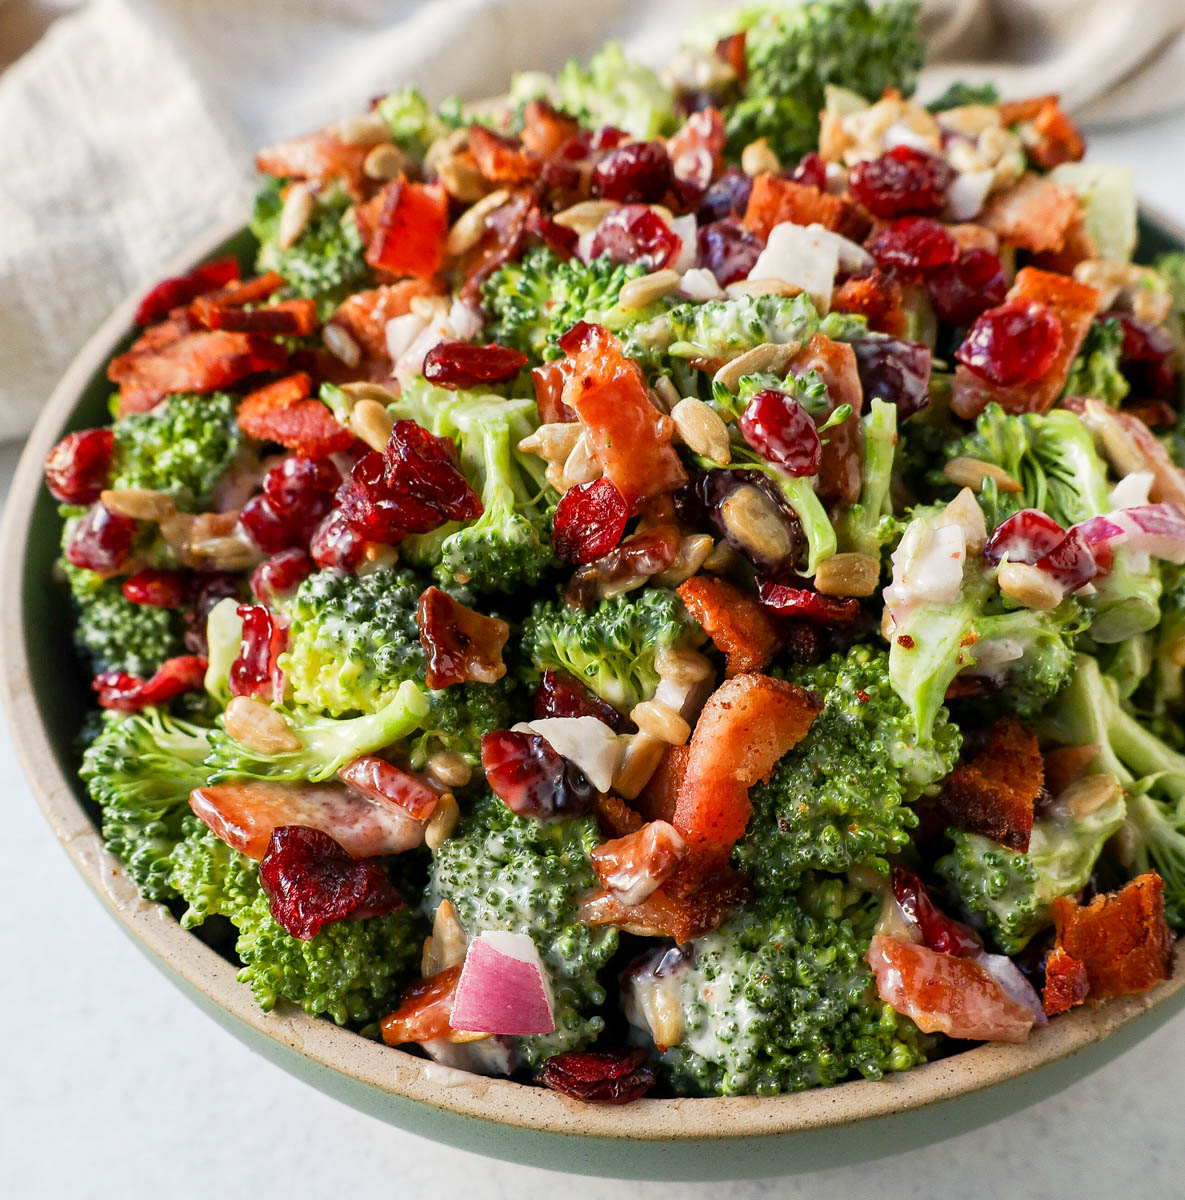 Crunchy, easy broccoli salad with crispy bacon, sweet dried cranberries, onion, and nuts all tossed in a sweet and tangy dressing. Tips for making the best broccoli salad. A classic potluck, BBQ, or summer side dish recipe!